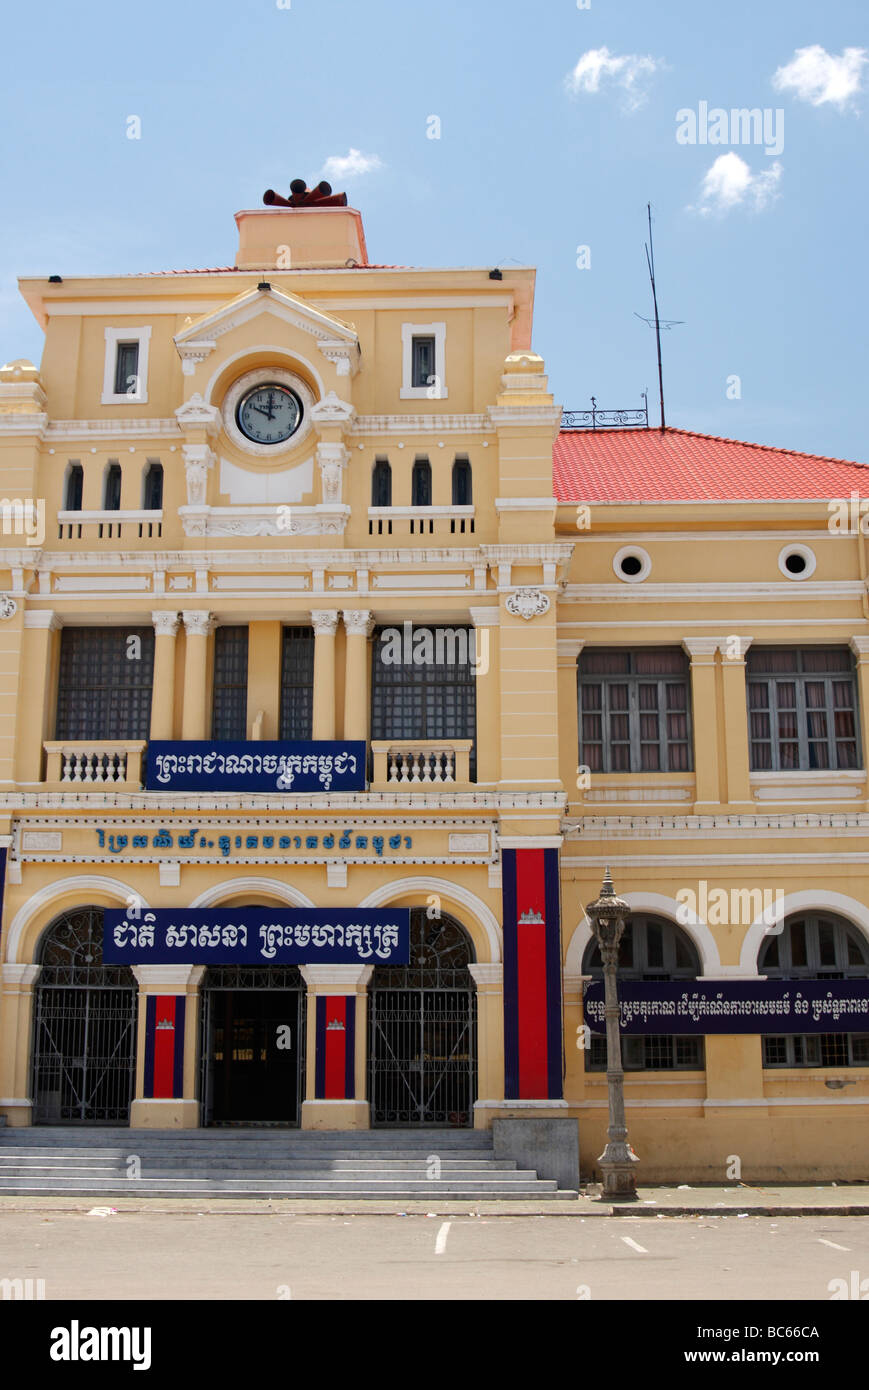 'Phnom Penh' 'Post Office', Cambodia, restored [French colonial] building architecture Stock Photo